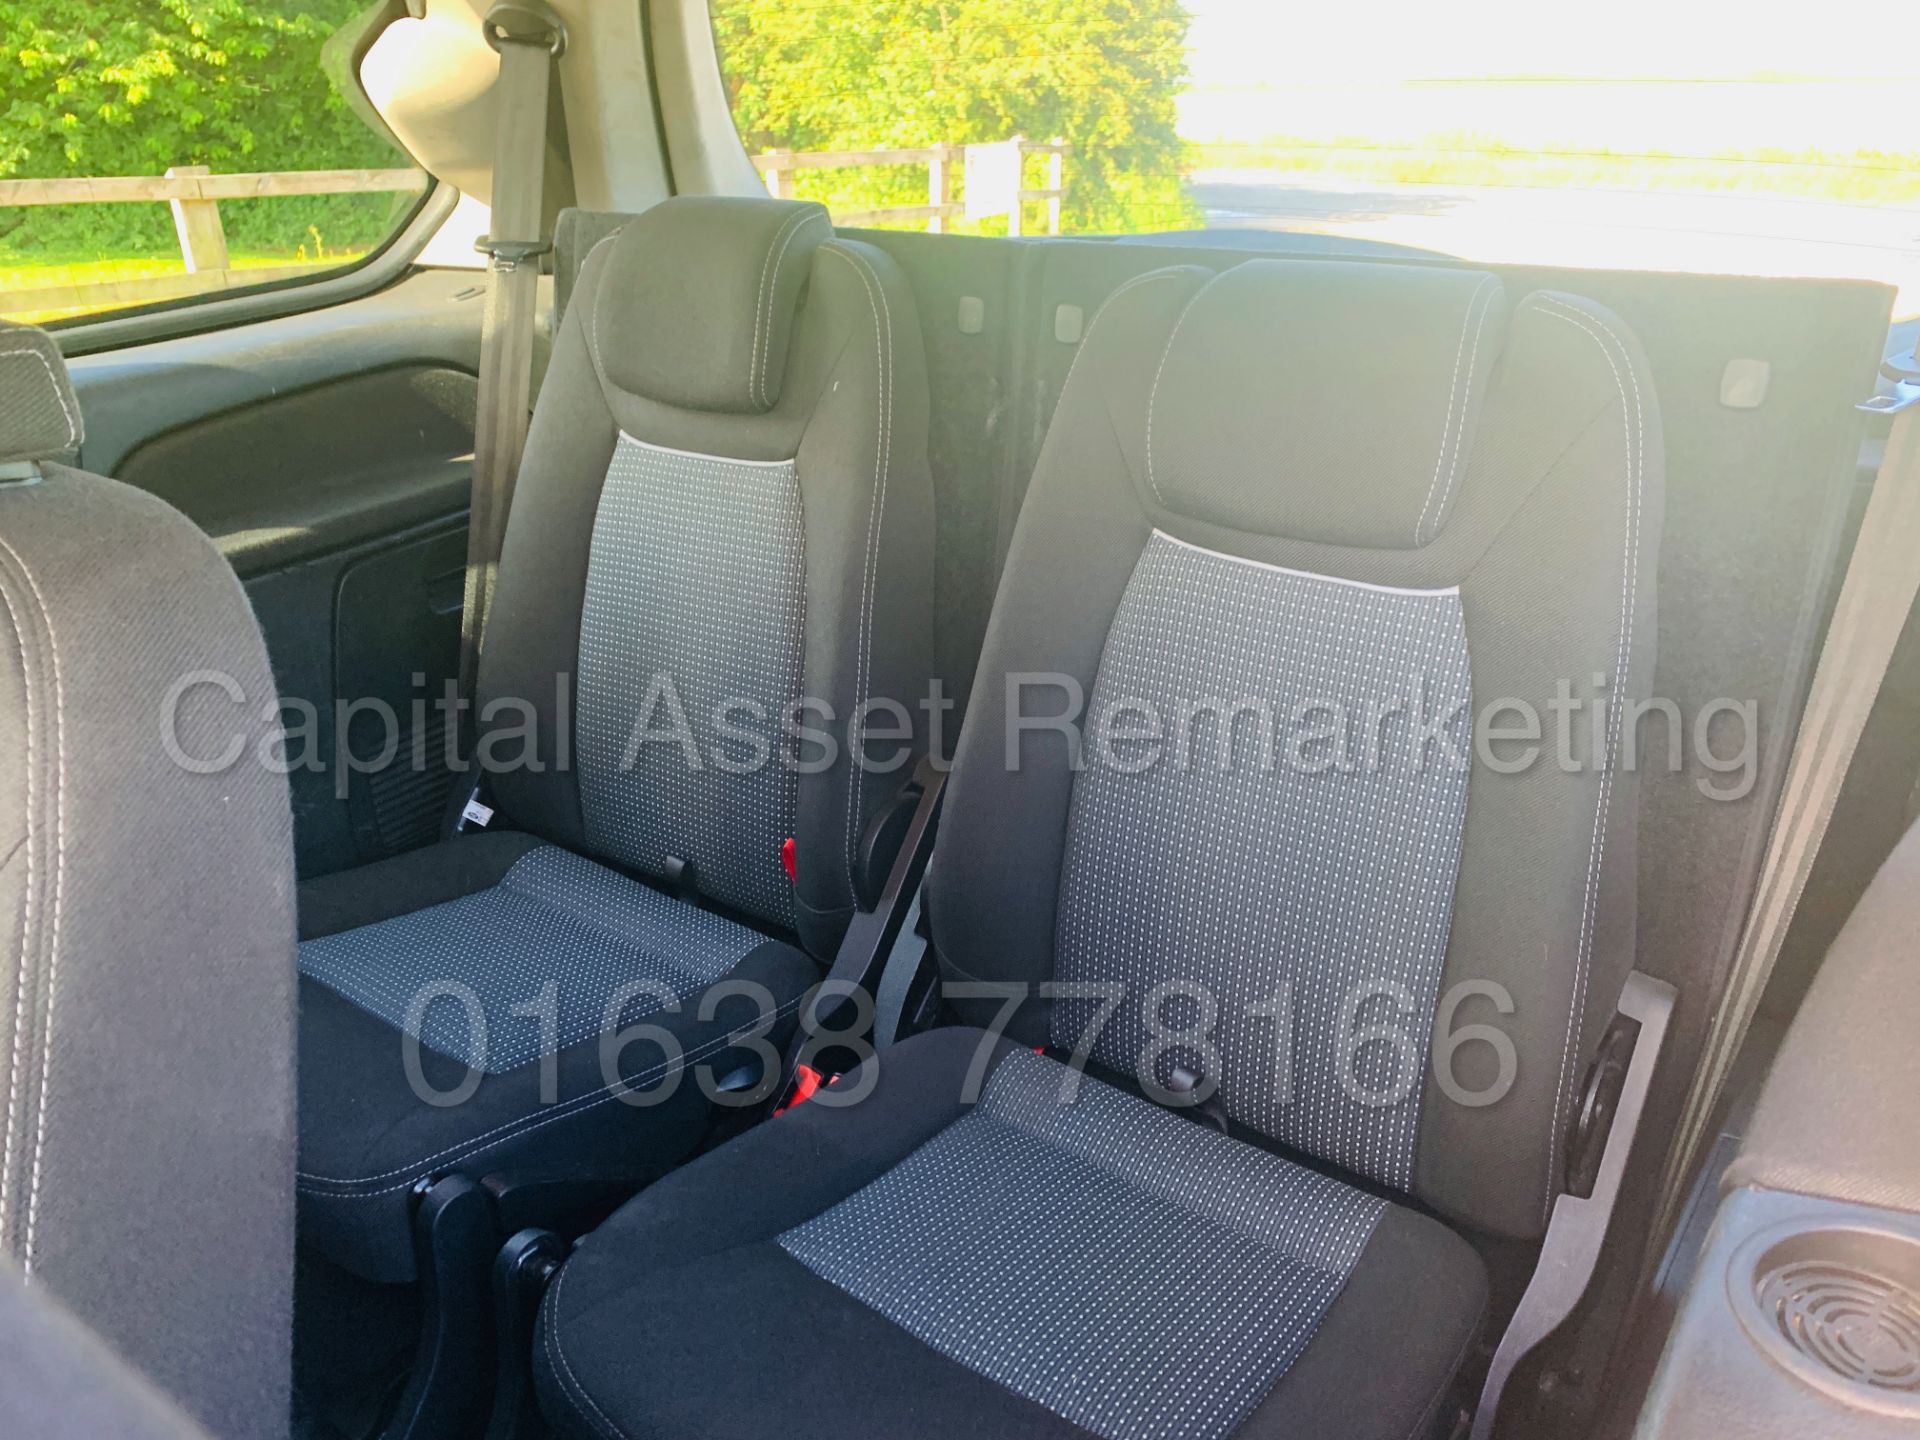 (ON SALE) FORD GALAXY *ZETEC* 7 SEATER MPV (2013) '2.0 TDCI - POWER SHIFT' (NO VAT - SAVE 20%) - Image 15 of 31